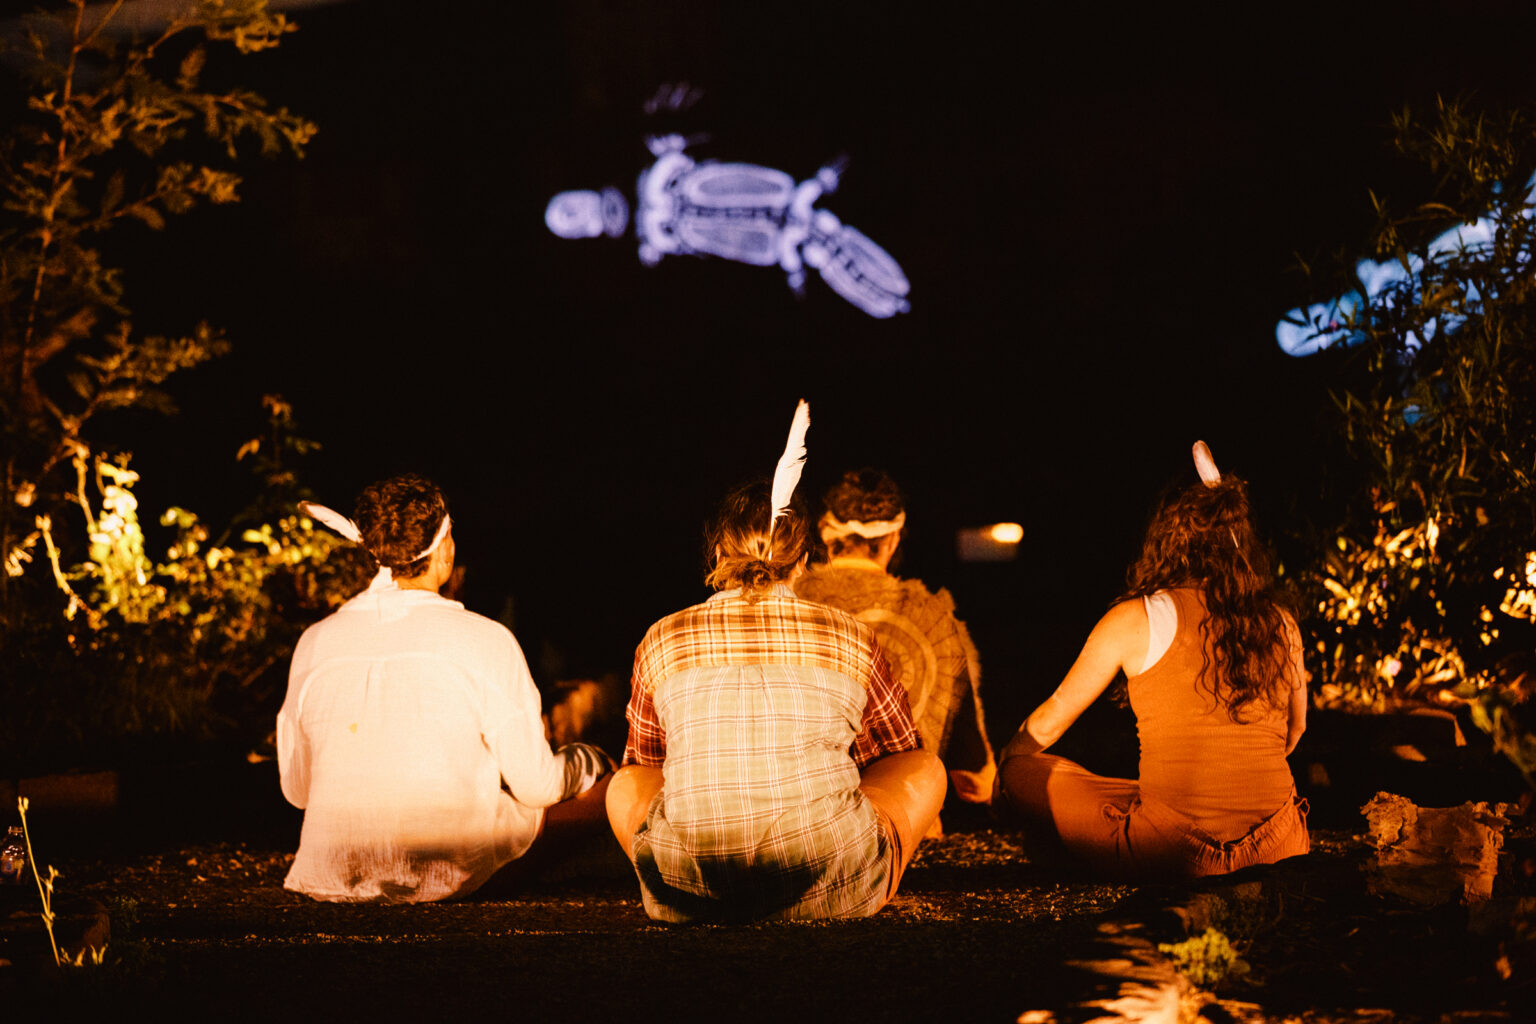 Four people are sitting outdoors on the ground, wearing headbands with a single feather sticking out. They are looking up at a projection art of a geometric platypus in the night sky above them. The image has earth tones and is taken at nighttime.